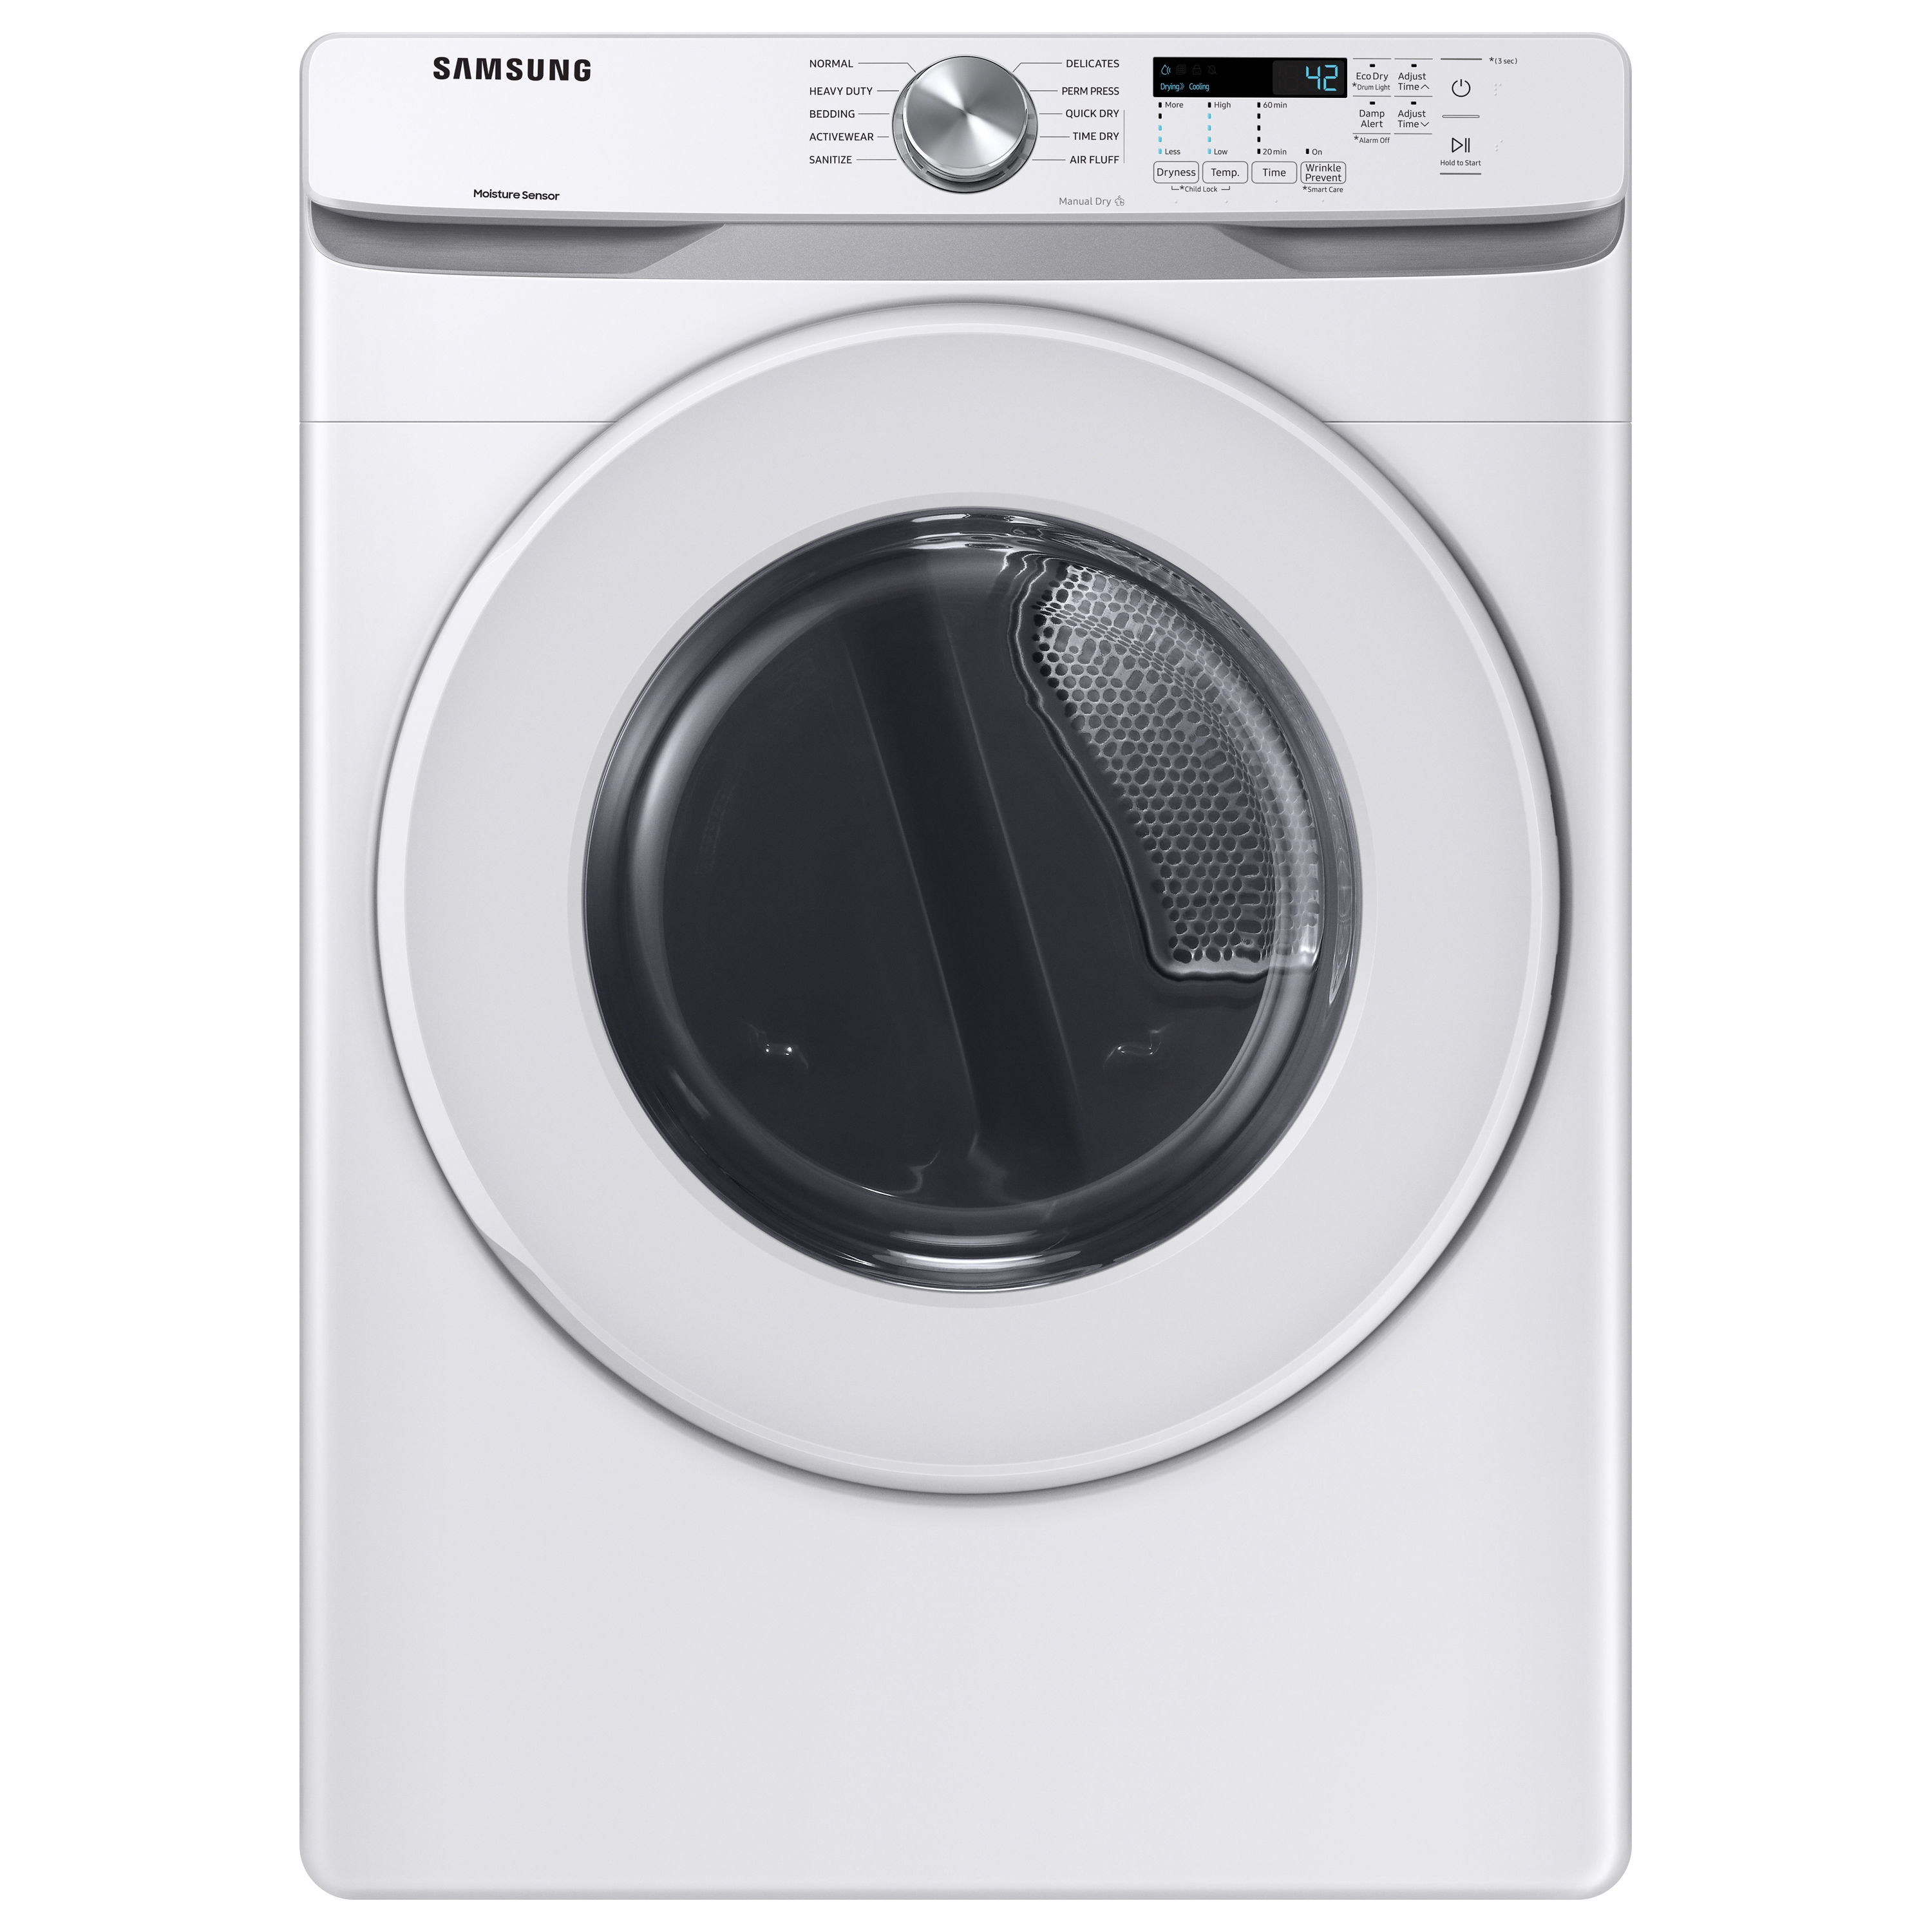 Samsung 7.5 cu. ft. Gas Long Vent Dryer with Sensor Dry in White(DVG45T6020W/A3)